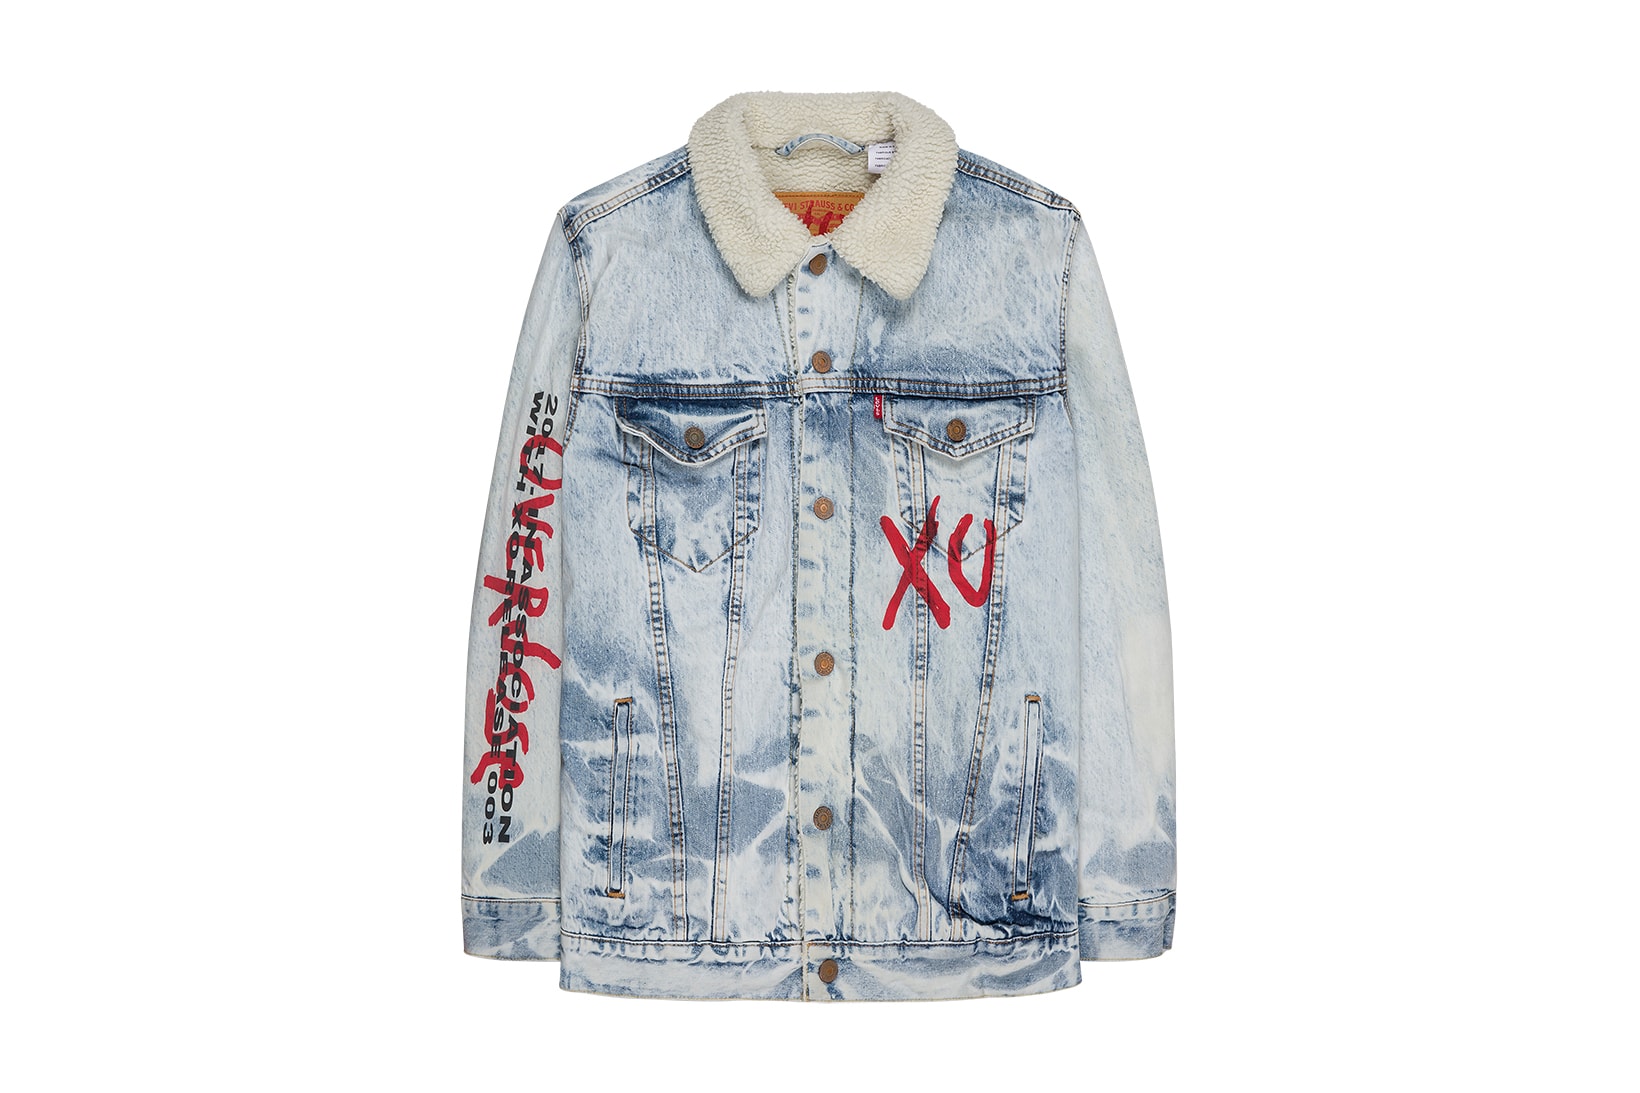 The Weeknd XO Starboy Legend Of The Fall Tour Phase 2 LEVI'S DENIM JACKET